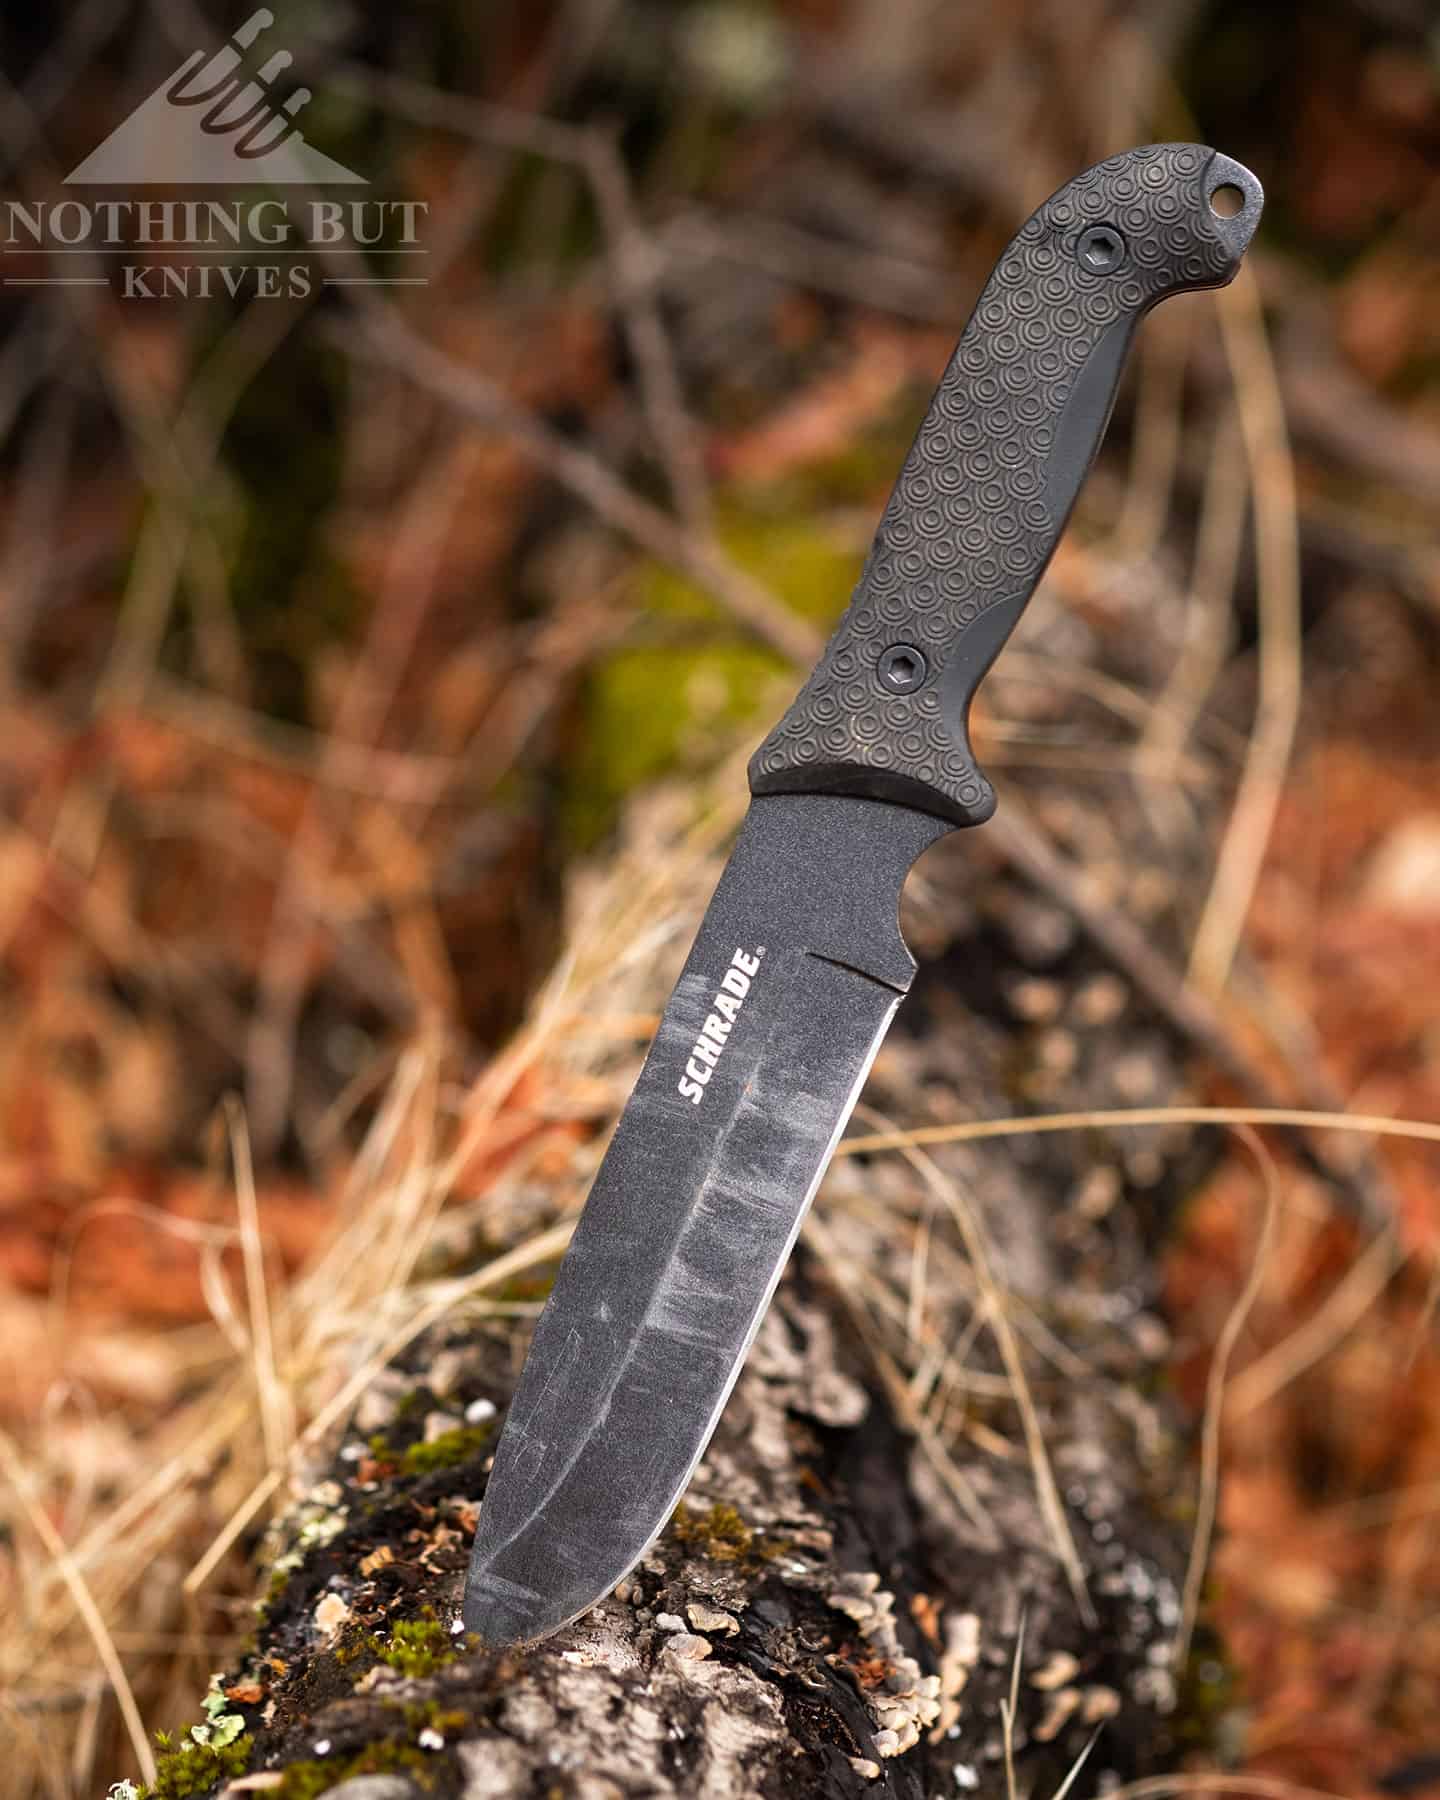 The Schrade Frontier is a great budget bushcraft that is capable of serious work. 